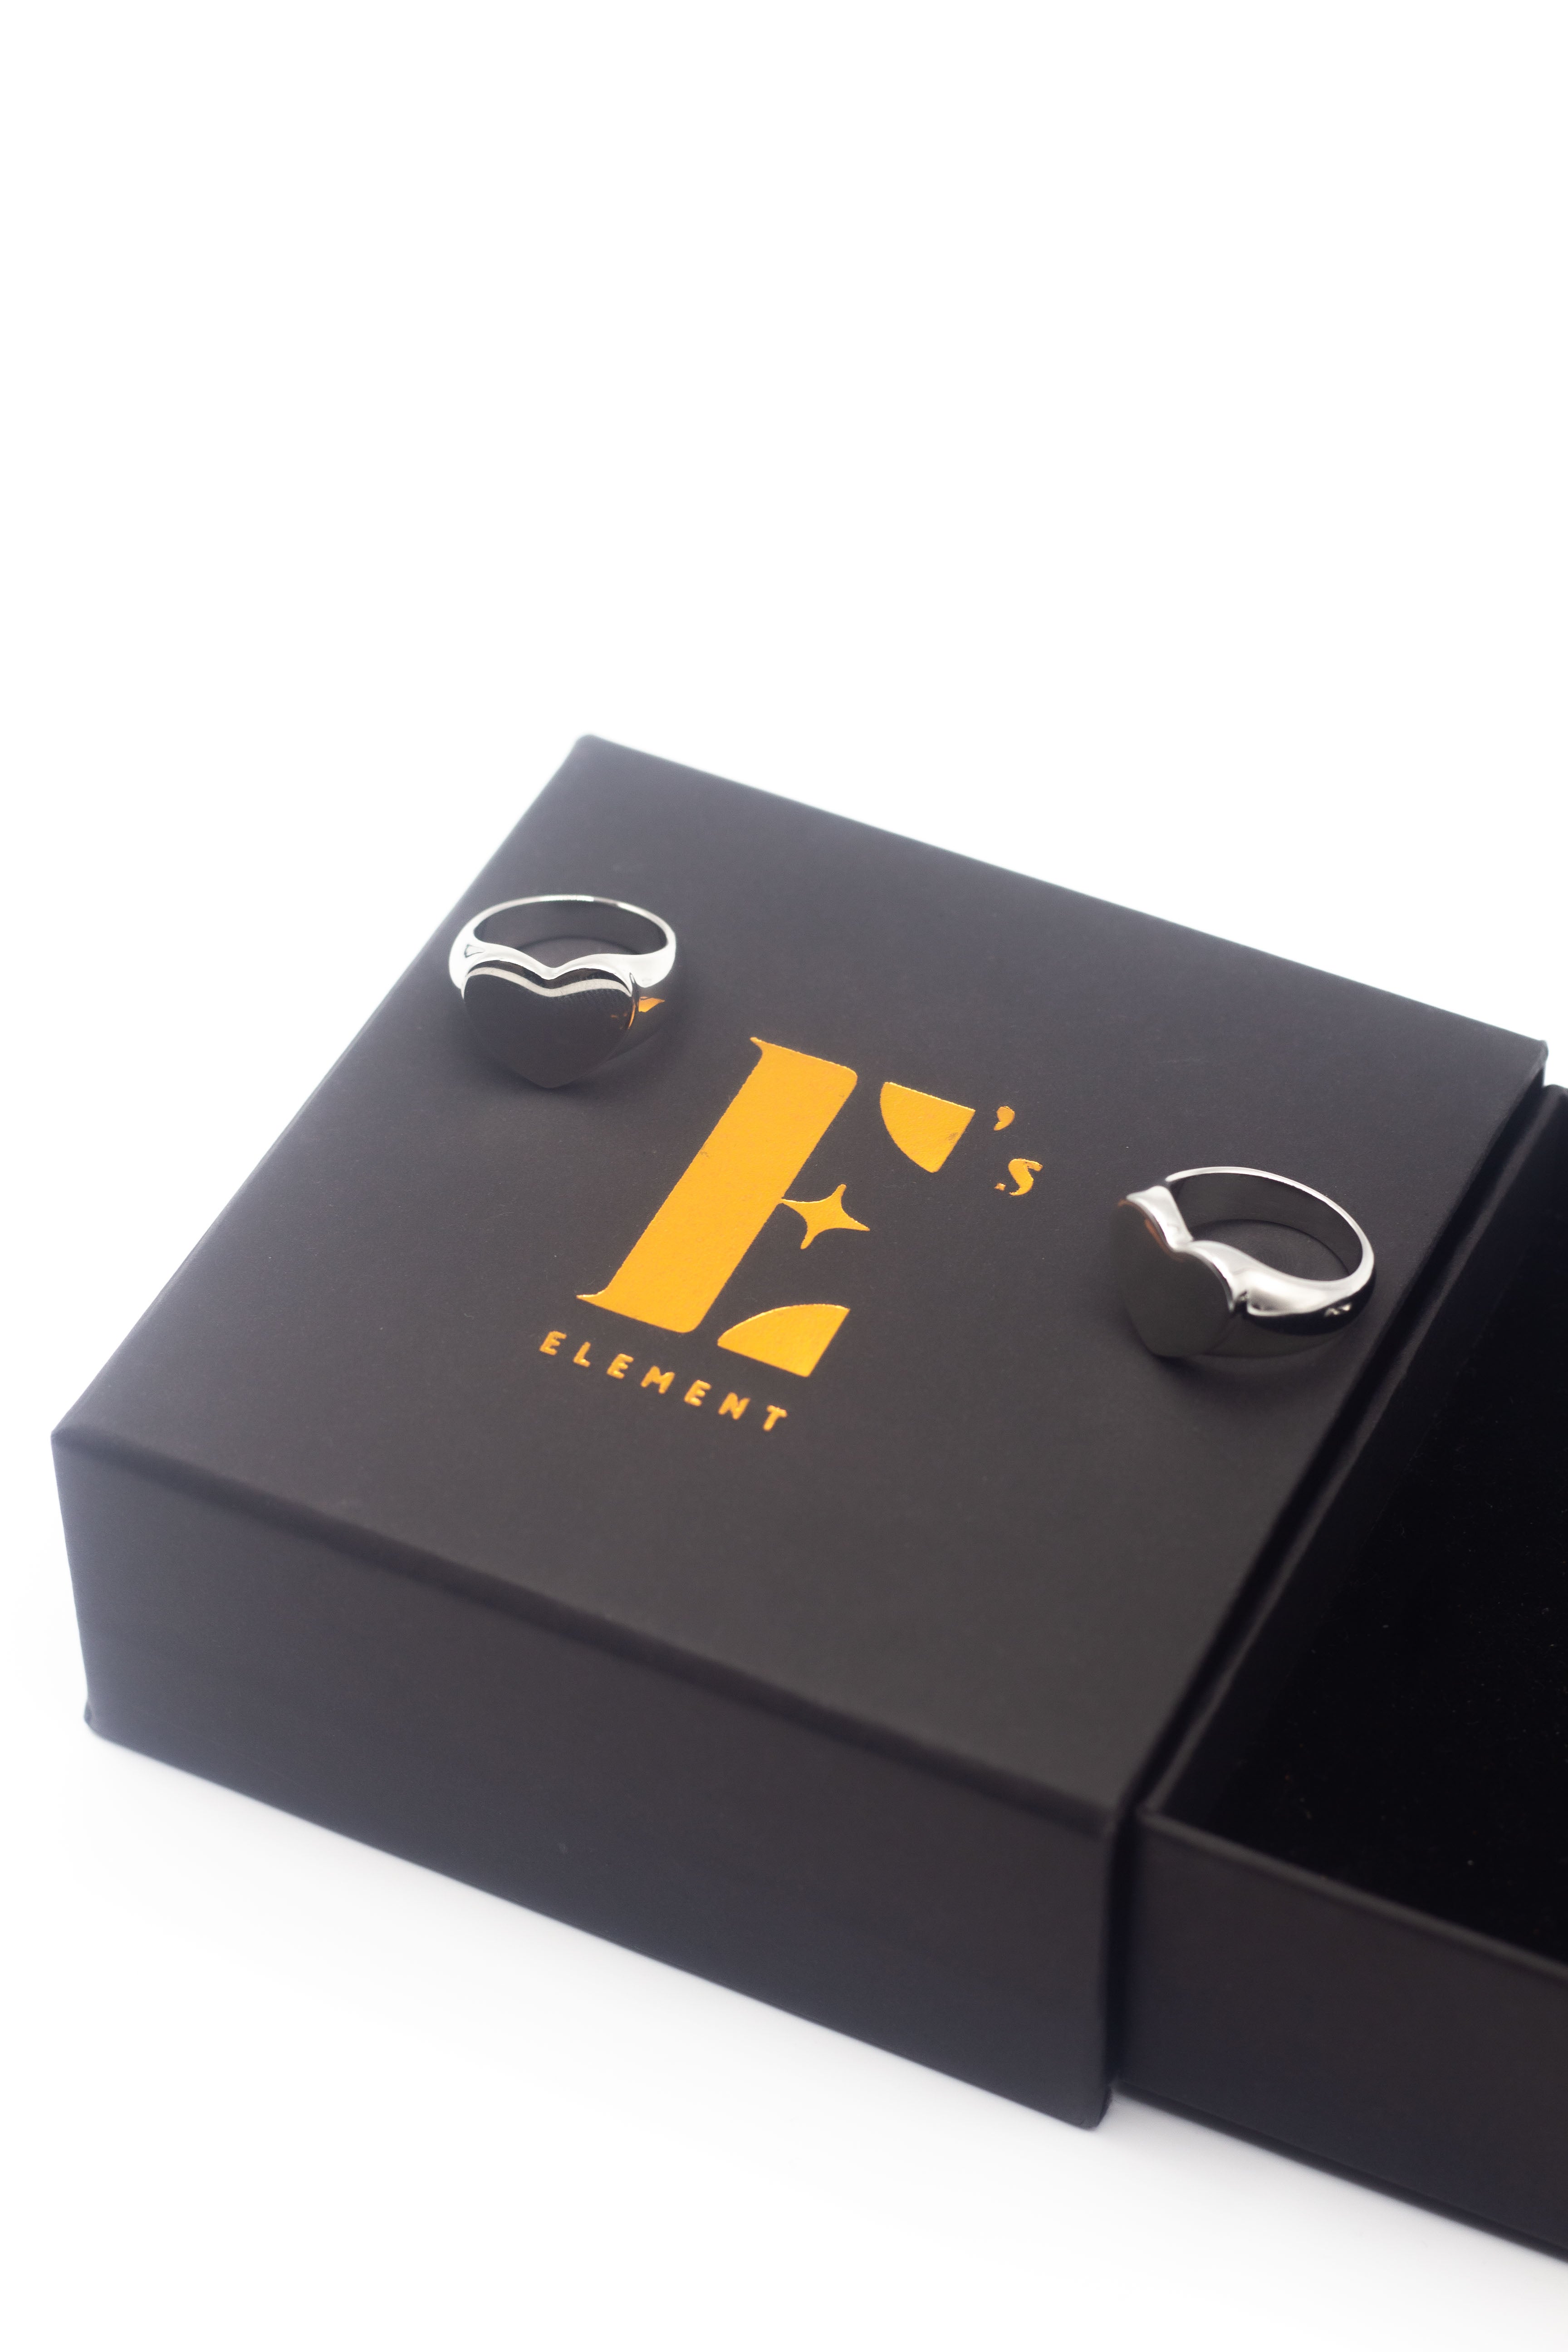 Two 18k silver heart signet rings resting on a black box with the E's Element logo imprinted in yellow. Ellina Heart Signet Ring by E's Element.